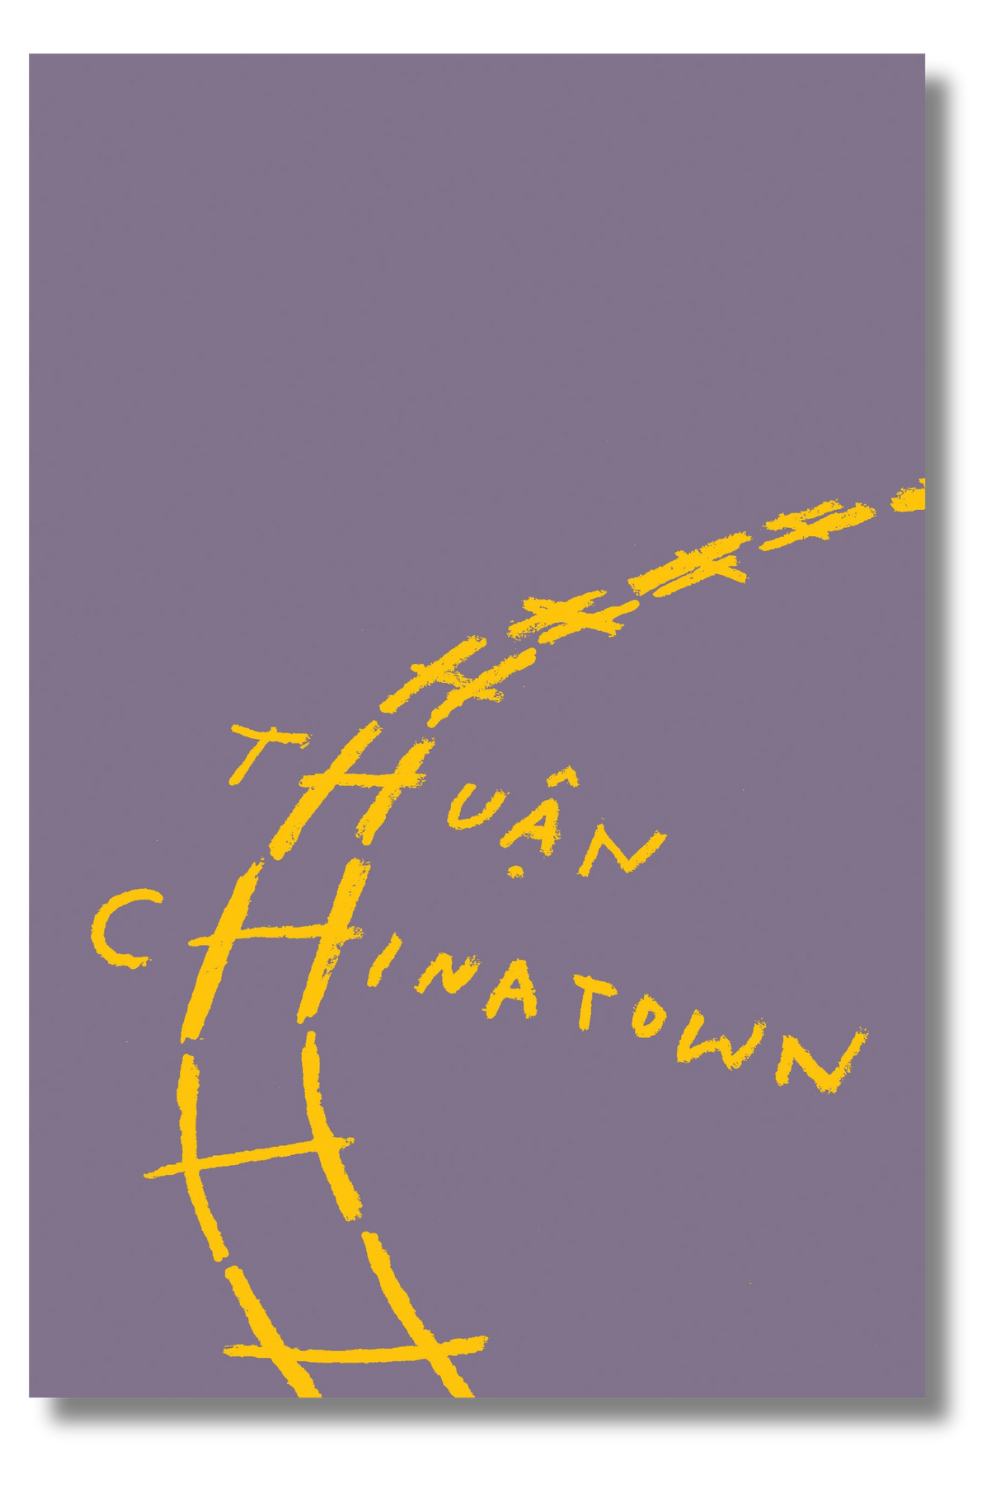 The cover of Thuan's "Chinatown"